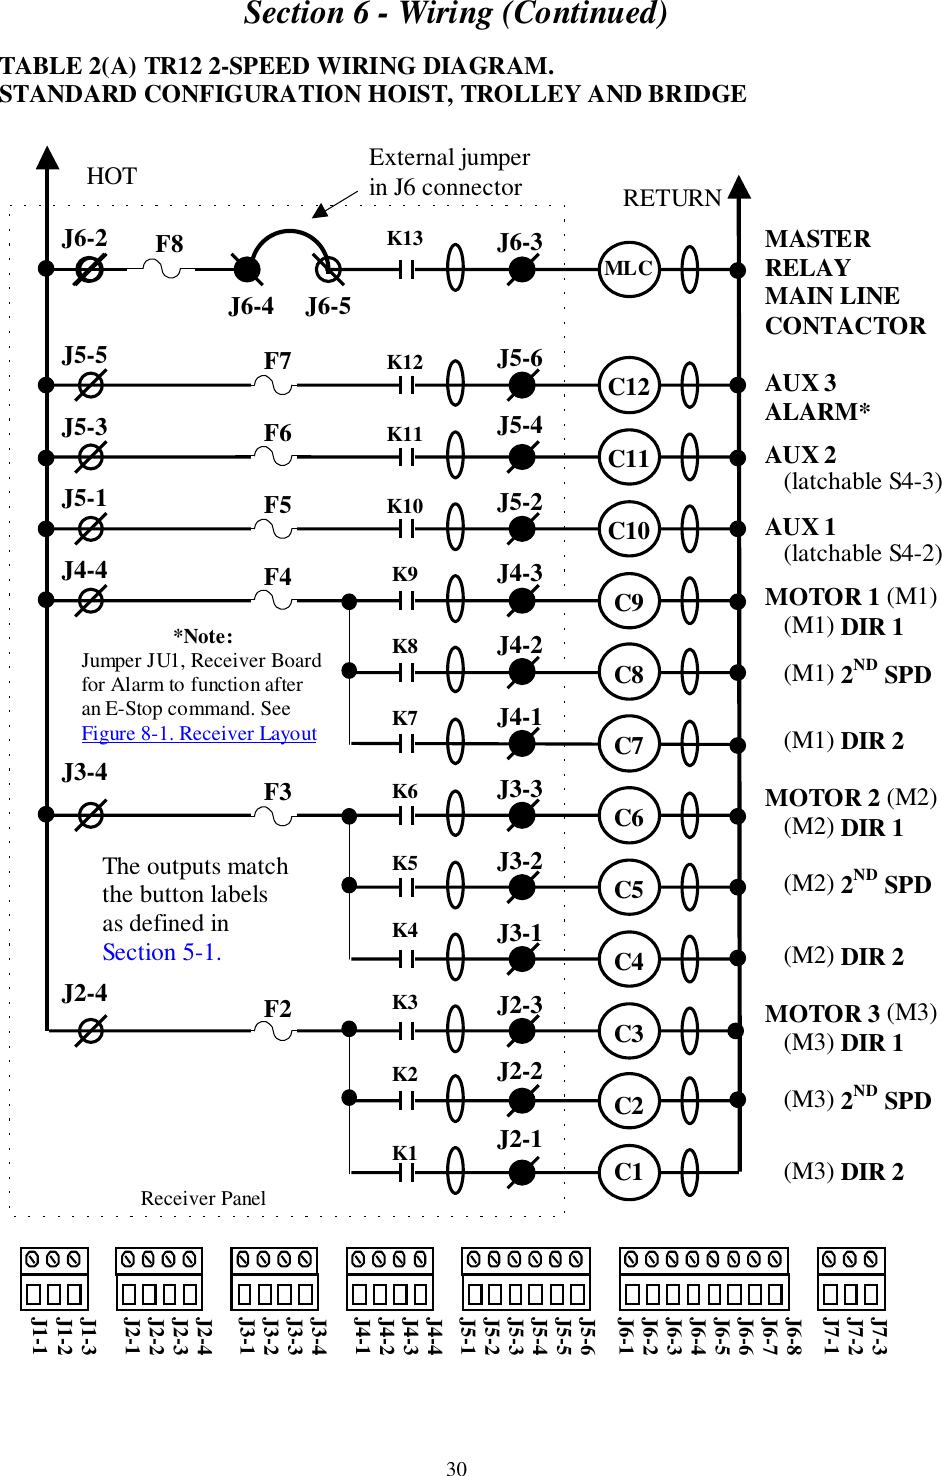 Section 6 - Wiring (Continued)30TABLE 2(A) TR12 2-SPEED WIRING DIAGRAM.STANDARD CONFIGURATION HOIST, TROLLEY AND BRIDGEMASTERRELAYMAIN LINECONTACTORAUX 3ALARM*AUX 2   (latchable S4-3)AUX 1   (latchable S4-2)MOTOR 1 (M1)   (M1) DIR 1   (M1) 2ND SPD   (M1) DIR 2MOTOR 2 (M2)   (M2) DIR 1   (M2) 2ND SPD   (M2) DIR 2MOTOR 3 (M3)   (M3) DIR 1   (M3) 2ND SPD   (M3) DIR 2     Receiver PanelJ6-2J5-5J5-3J5-1J4-4J3-4J2-4J6-3J5-6J5-4J5-2J4-3J4-2J4-1J3-3J3-2J3-1J2-3J2-2J2-1HOT RETURNK13K12K11K10K9K8K7K6K5K4K3K2K1MLCC12C11C10C9C8C7C6C5C4C3C2C1F7F6F5F4F3F2J7-3J7-2J7-1J6-8J6-7J6-6J6-5J6-4J6-3J6-2J6-1J5-6J5-5J5-4J5-3J5-2J5-1J4-4J4-3J4-2J4-1J3-4J3-3J3-2J3-1J2-4J2-3J2-2J2-1J1-3J1-2J1-1External jumperin J6 connectorJ6-4     J6-5F8*Note:Jumper JU1, Receiver Boardfor Alarm to function afteran E-Stop command. SeeFigure 8-1. Receiver LayoutThe outputs matchthe button labelsas defined inSection 5-1.